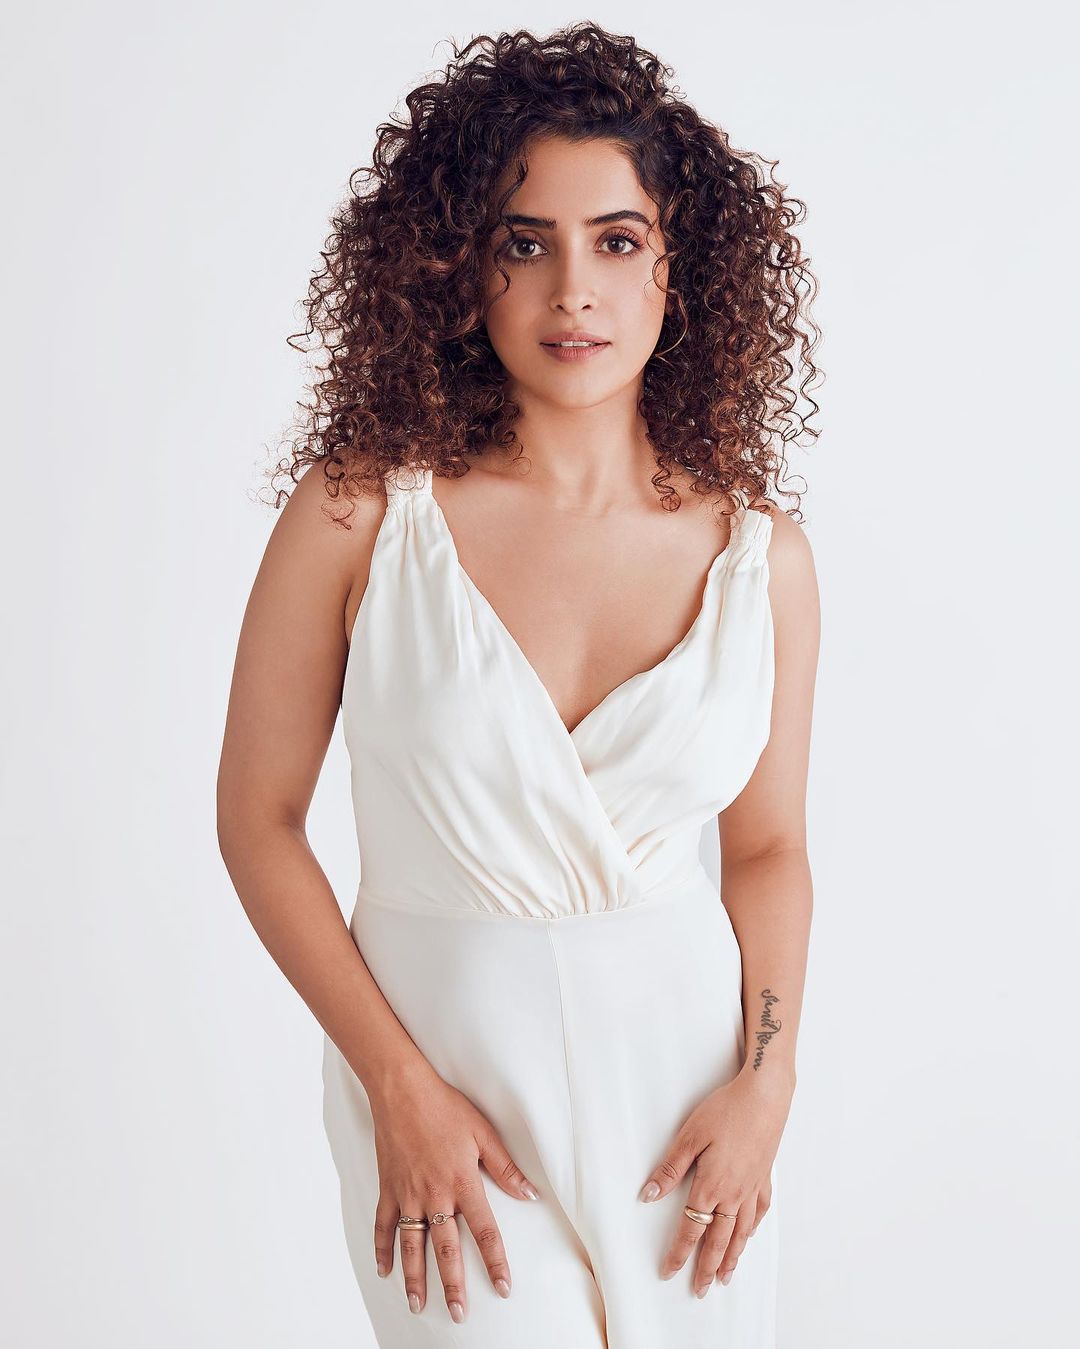 Sanya Malhotra is giving chic goals in a plain white jumpsuit